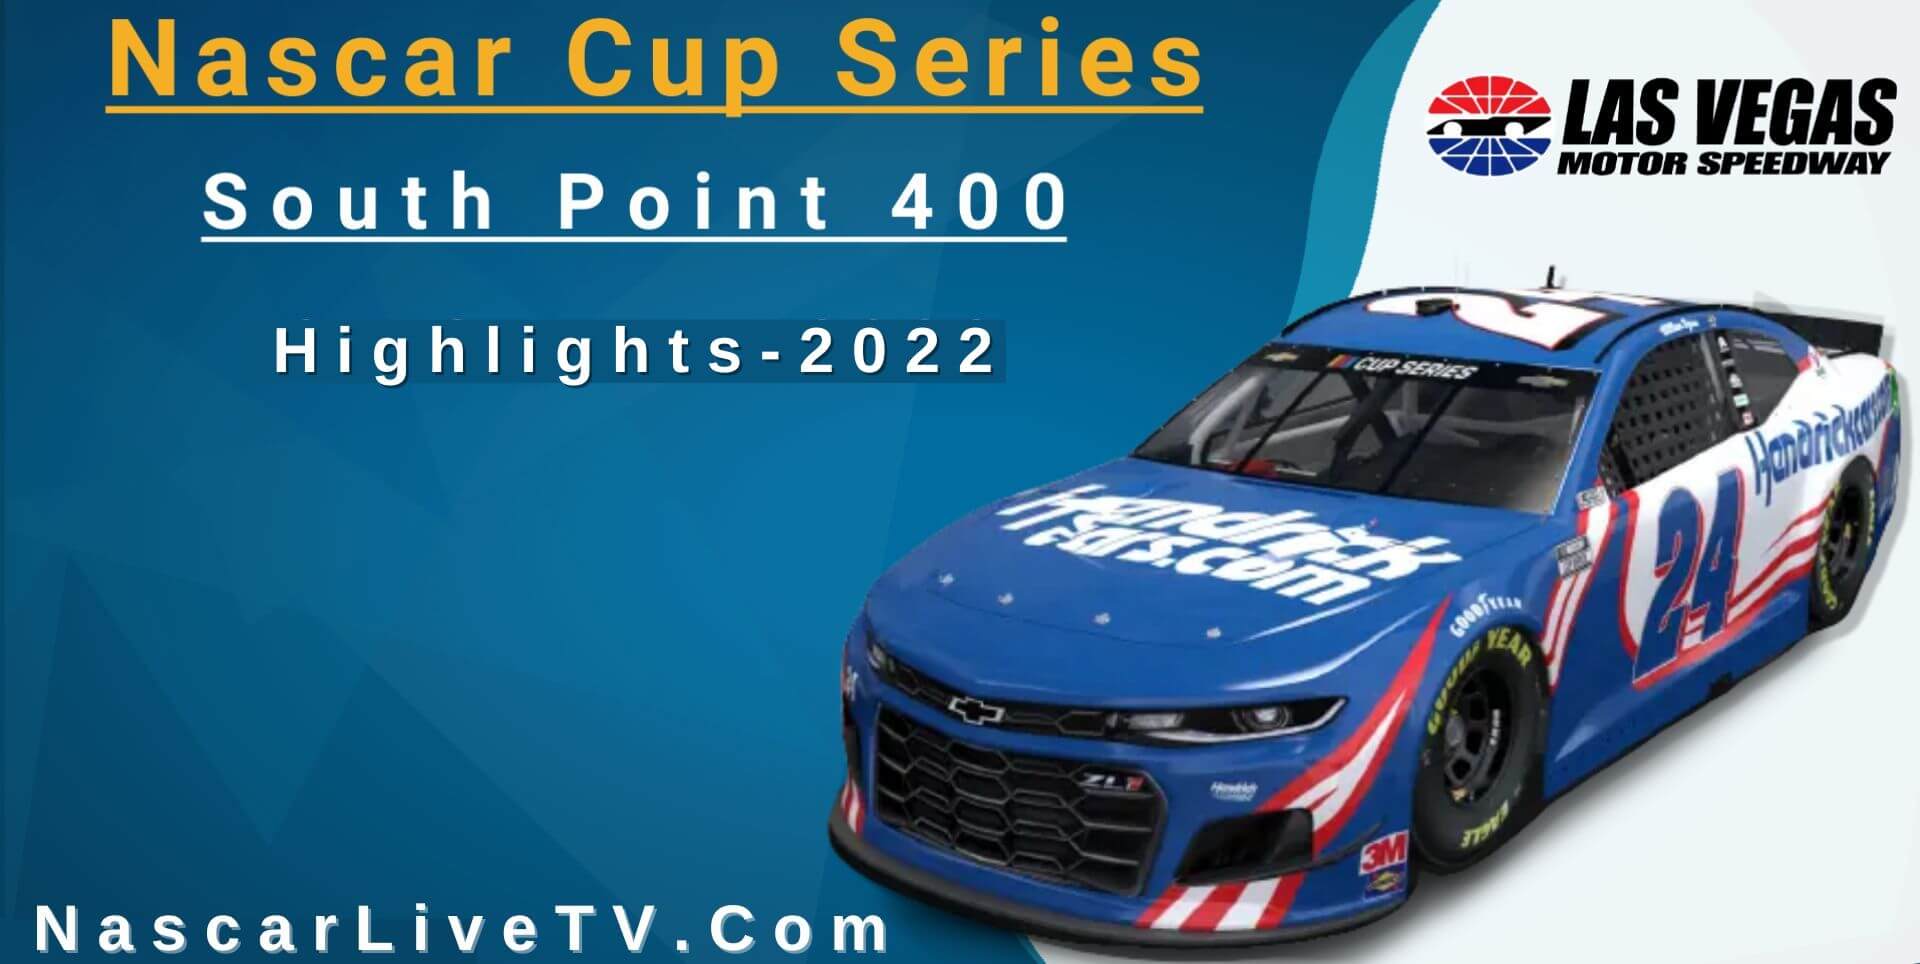 South Point 400 Highlights NASCAR Cup Series 2022